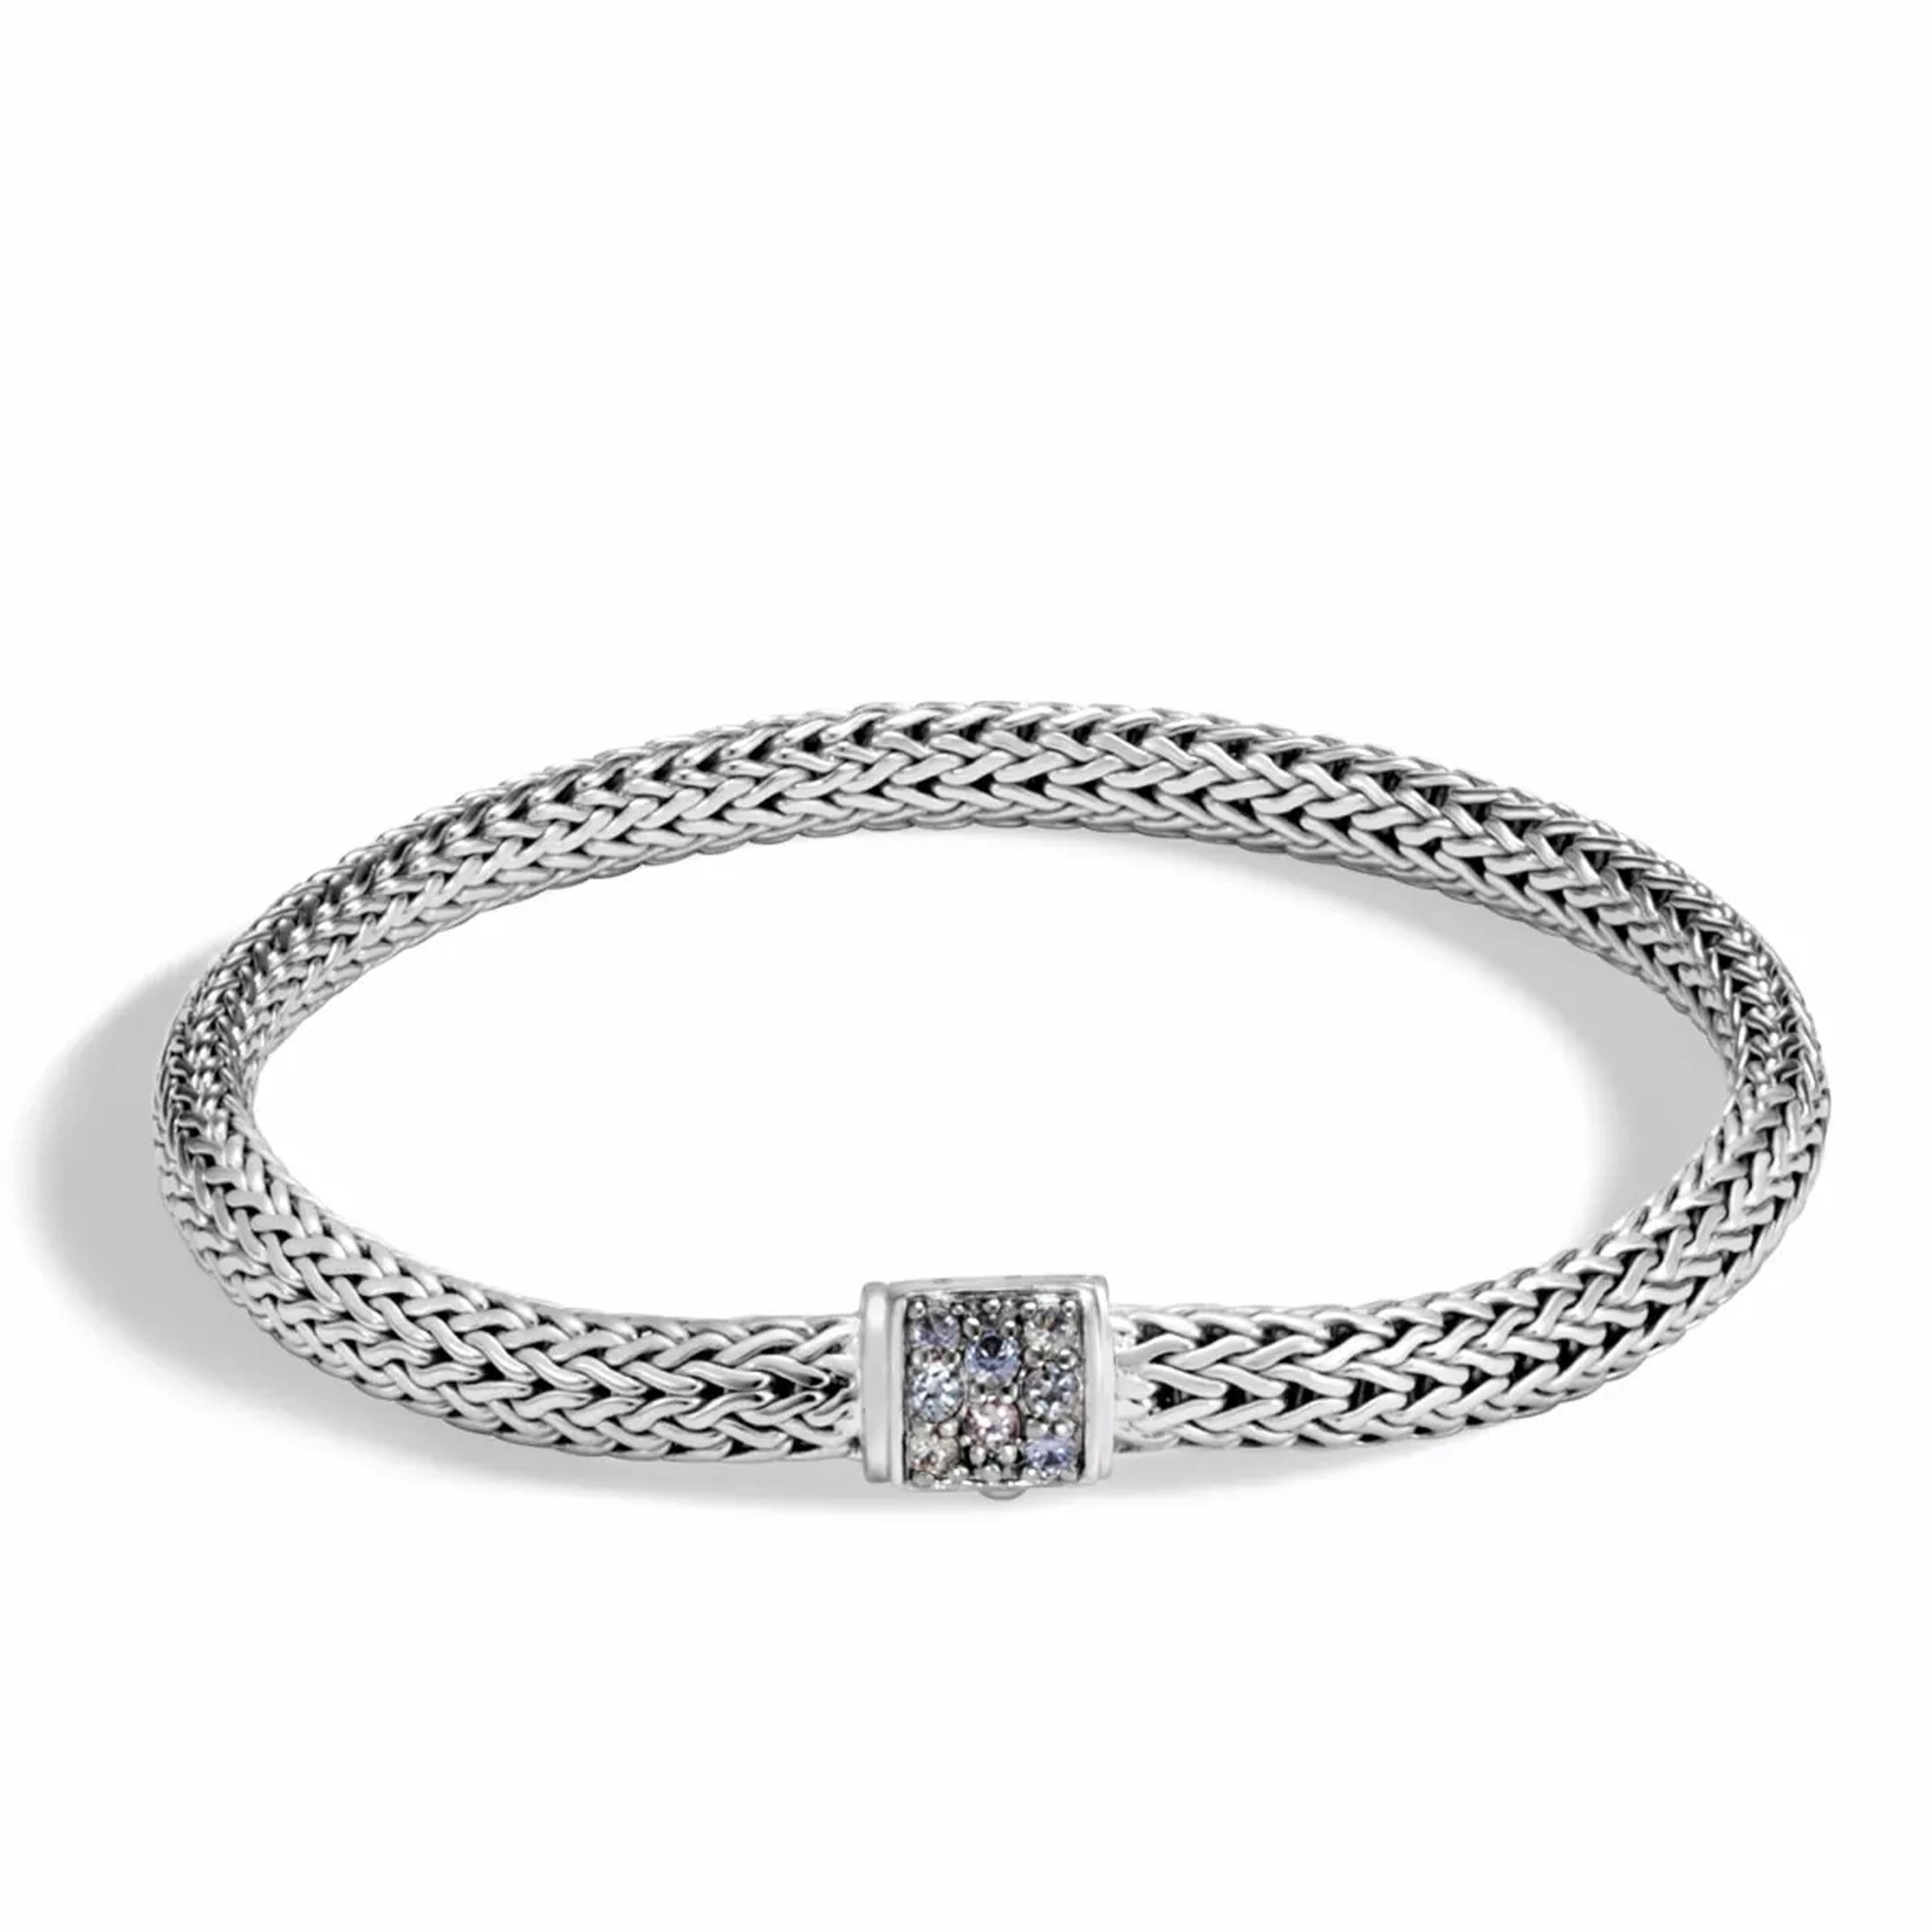 This Classic Chain bracelet from John Hardy is crafted from sterling silver and features gray sapphires on the clasp.

The bracelet measures 7 